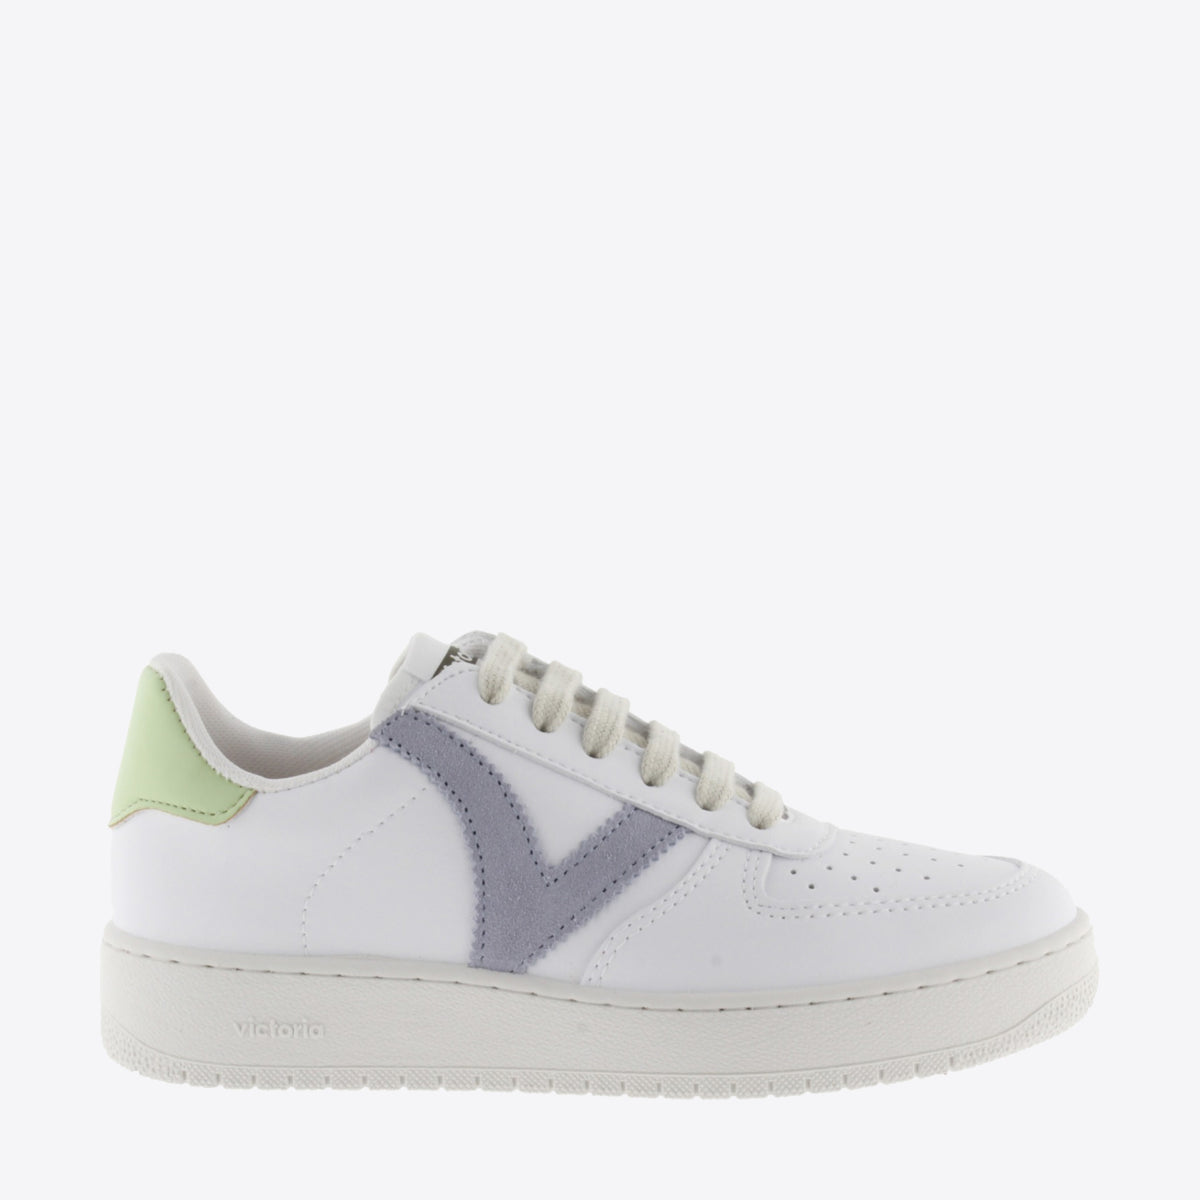 VICTORIA Madrid Contrast Faux Leather Lilac - Image 1